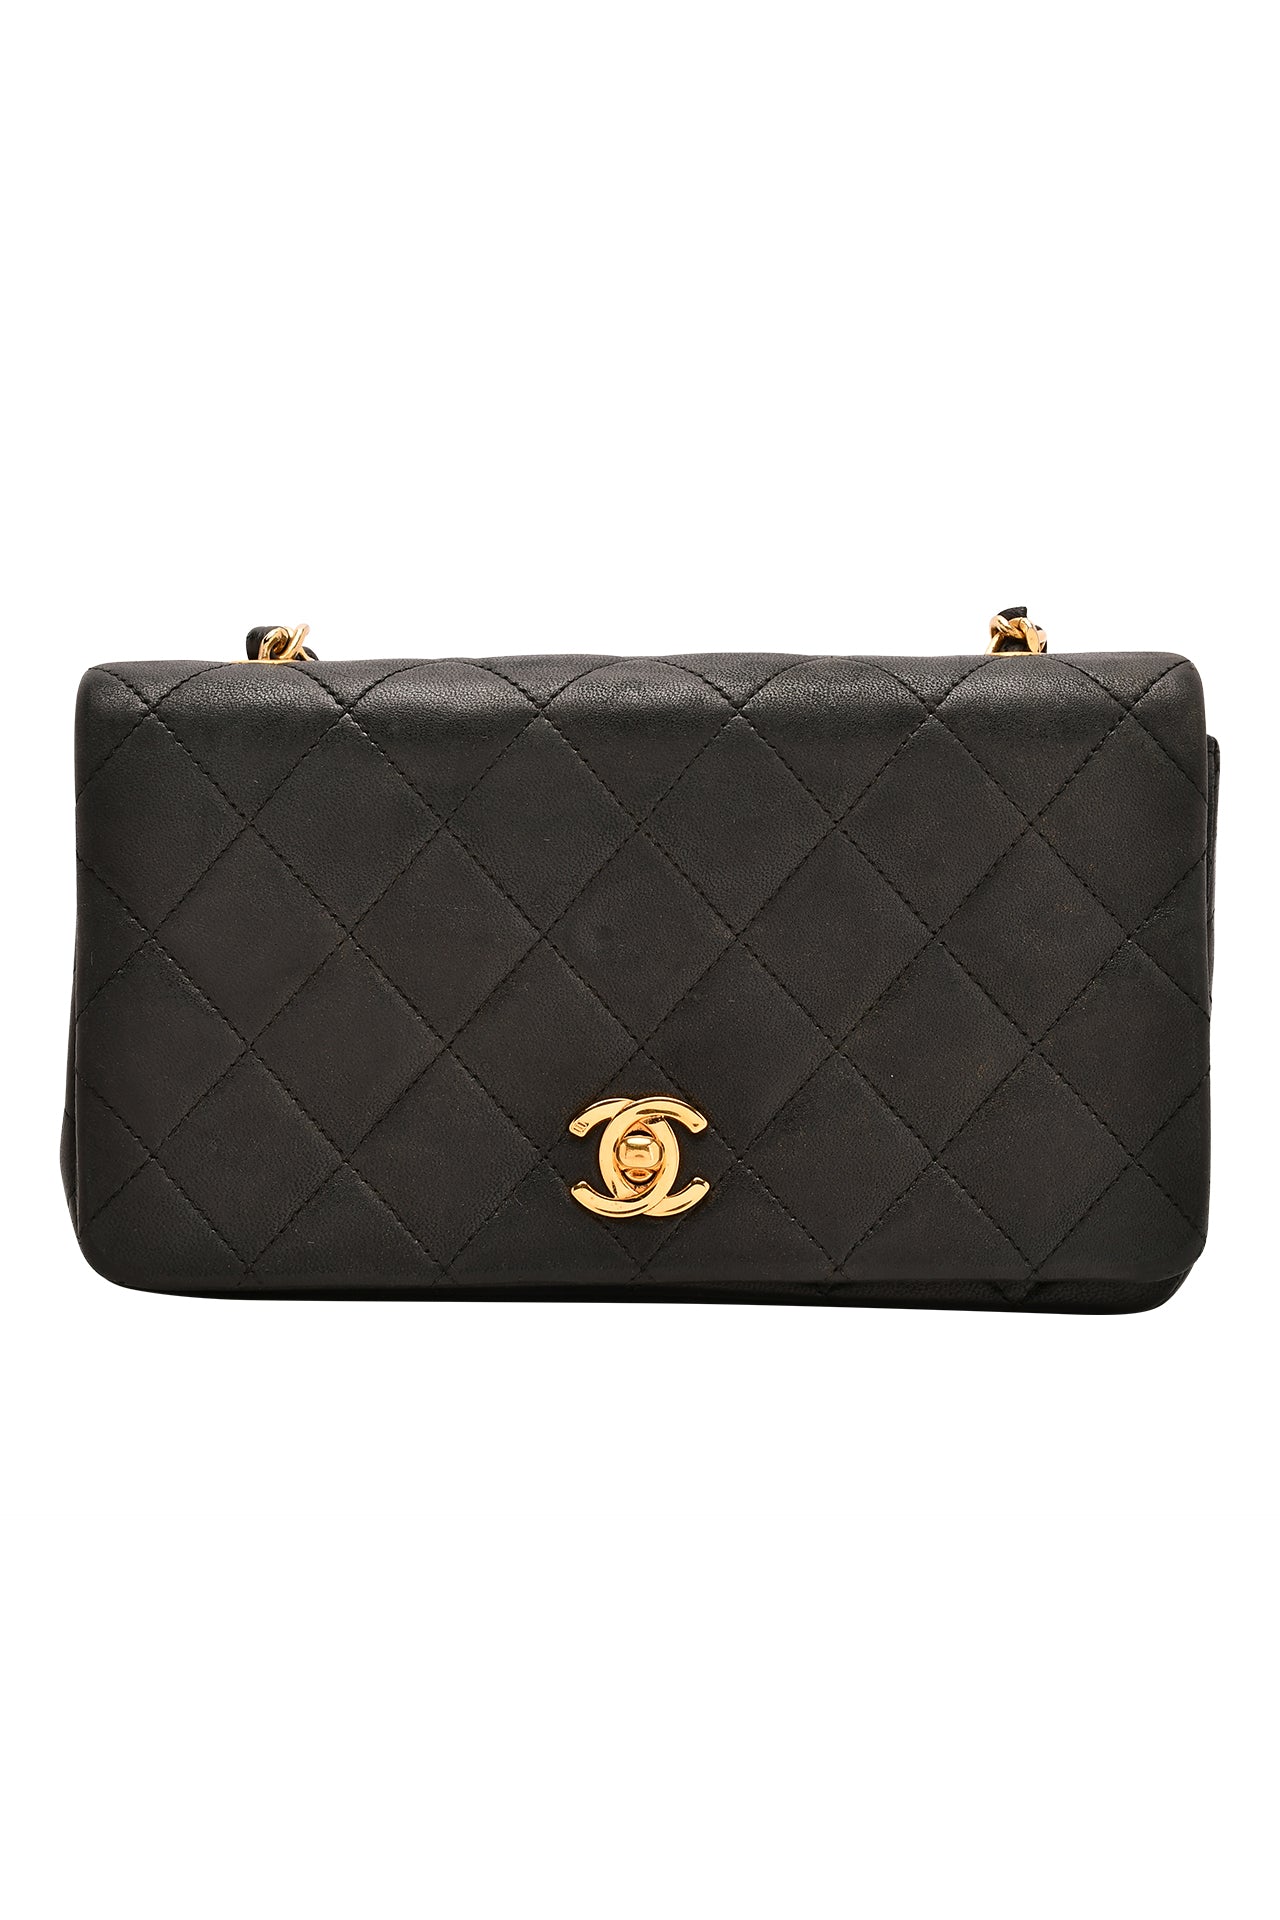 Chanel Lambskin Quilted Small Single Flap Black